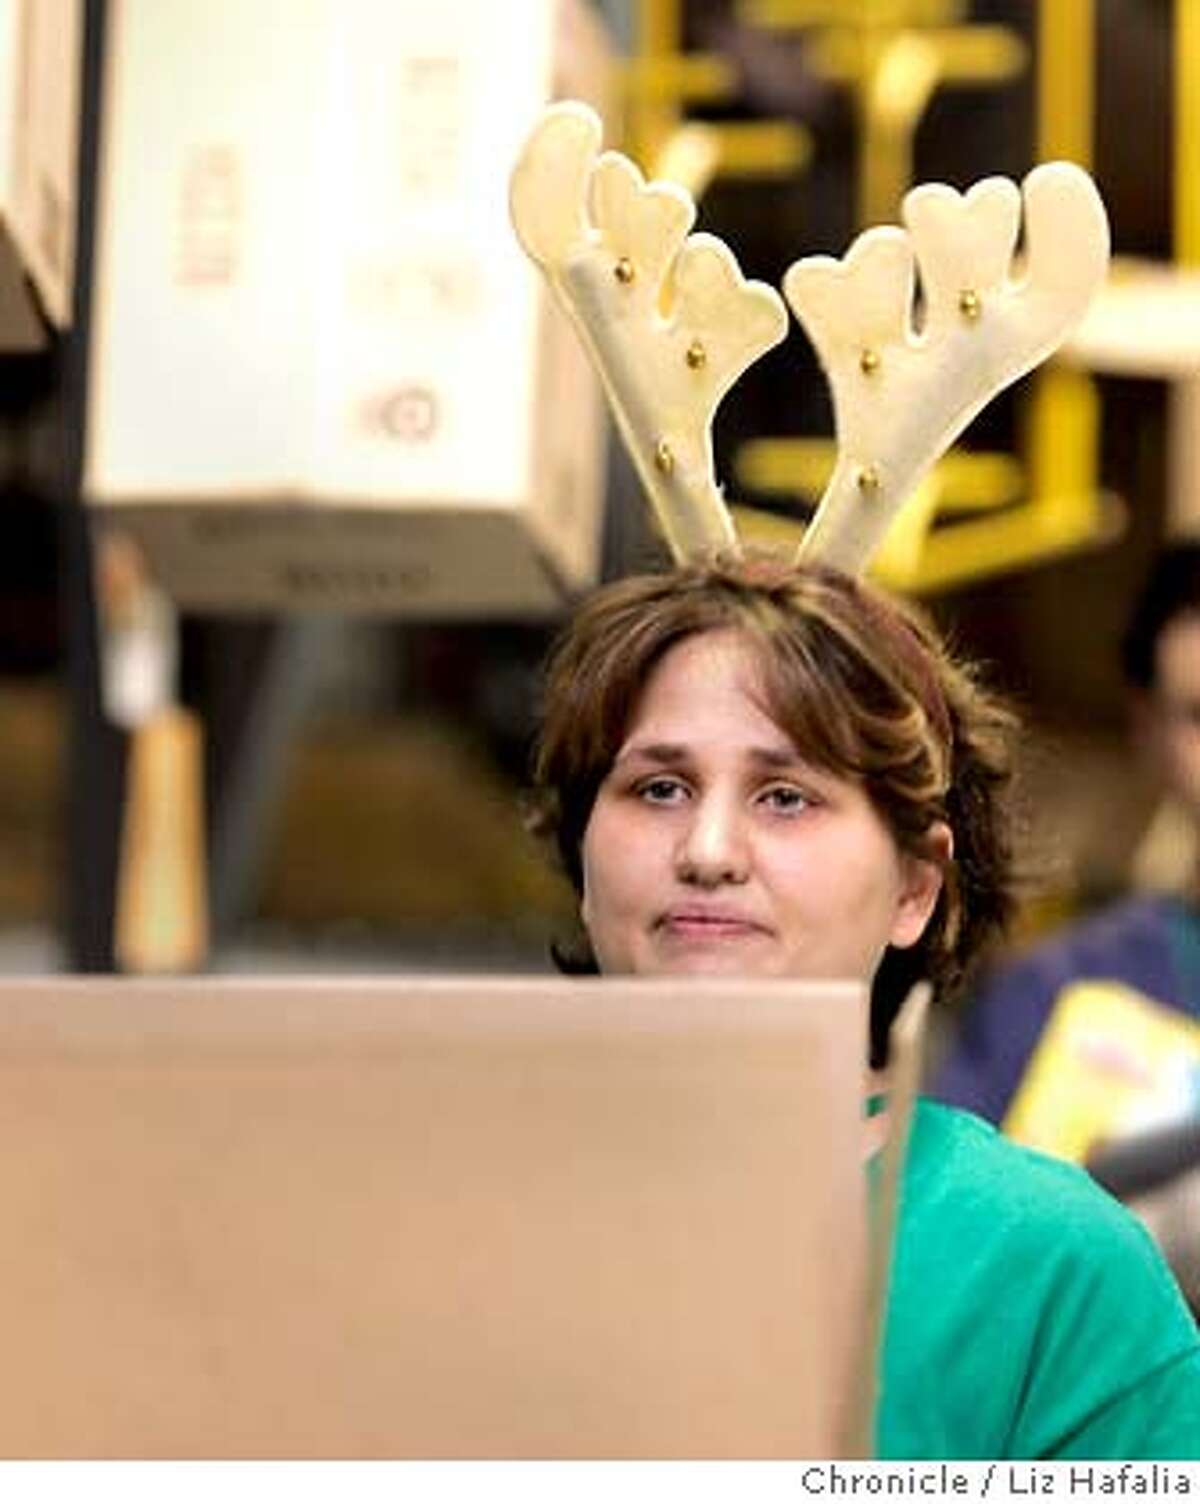 The Amazon.com distribution center in Fernley, NV, during its peak hoilday shopping season. Julie Gerbeler waiting for merchandise to box . Shot on 12/15/04 in Fernley. LIZ HAFALIA/The Chronicle